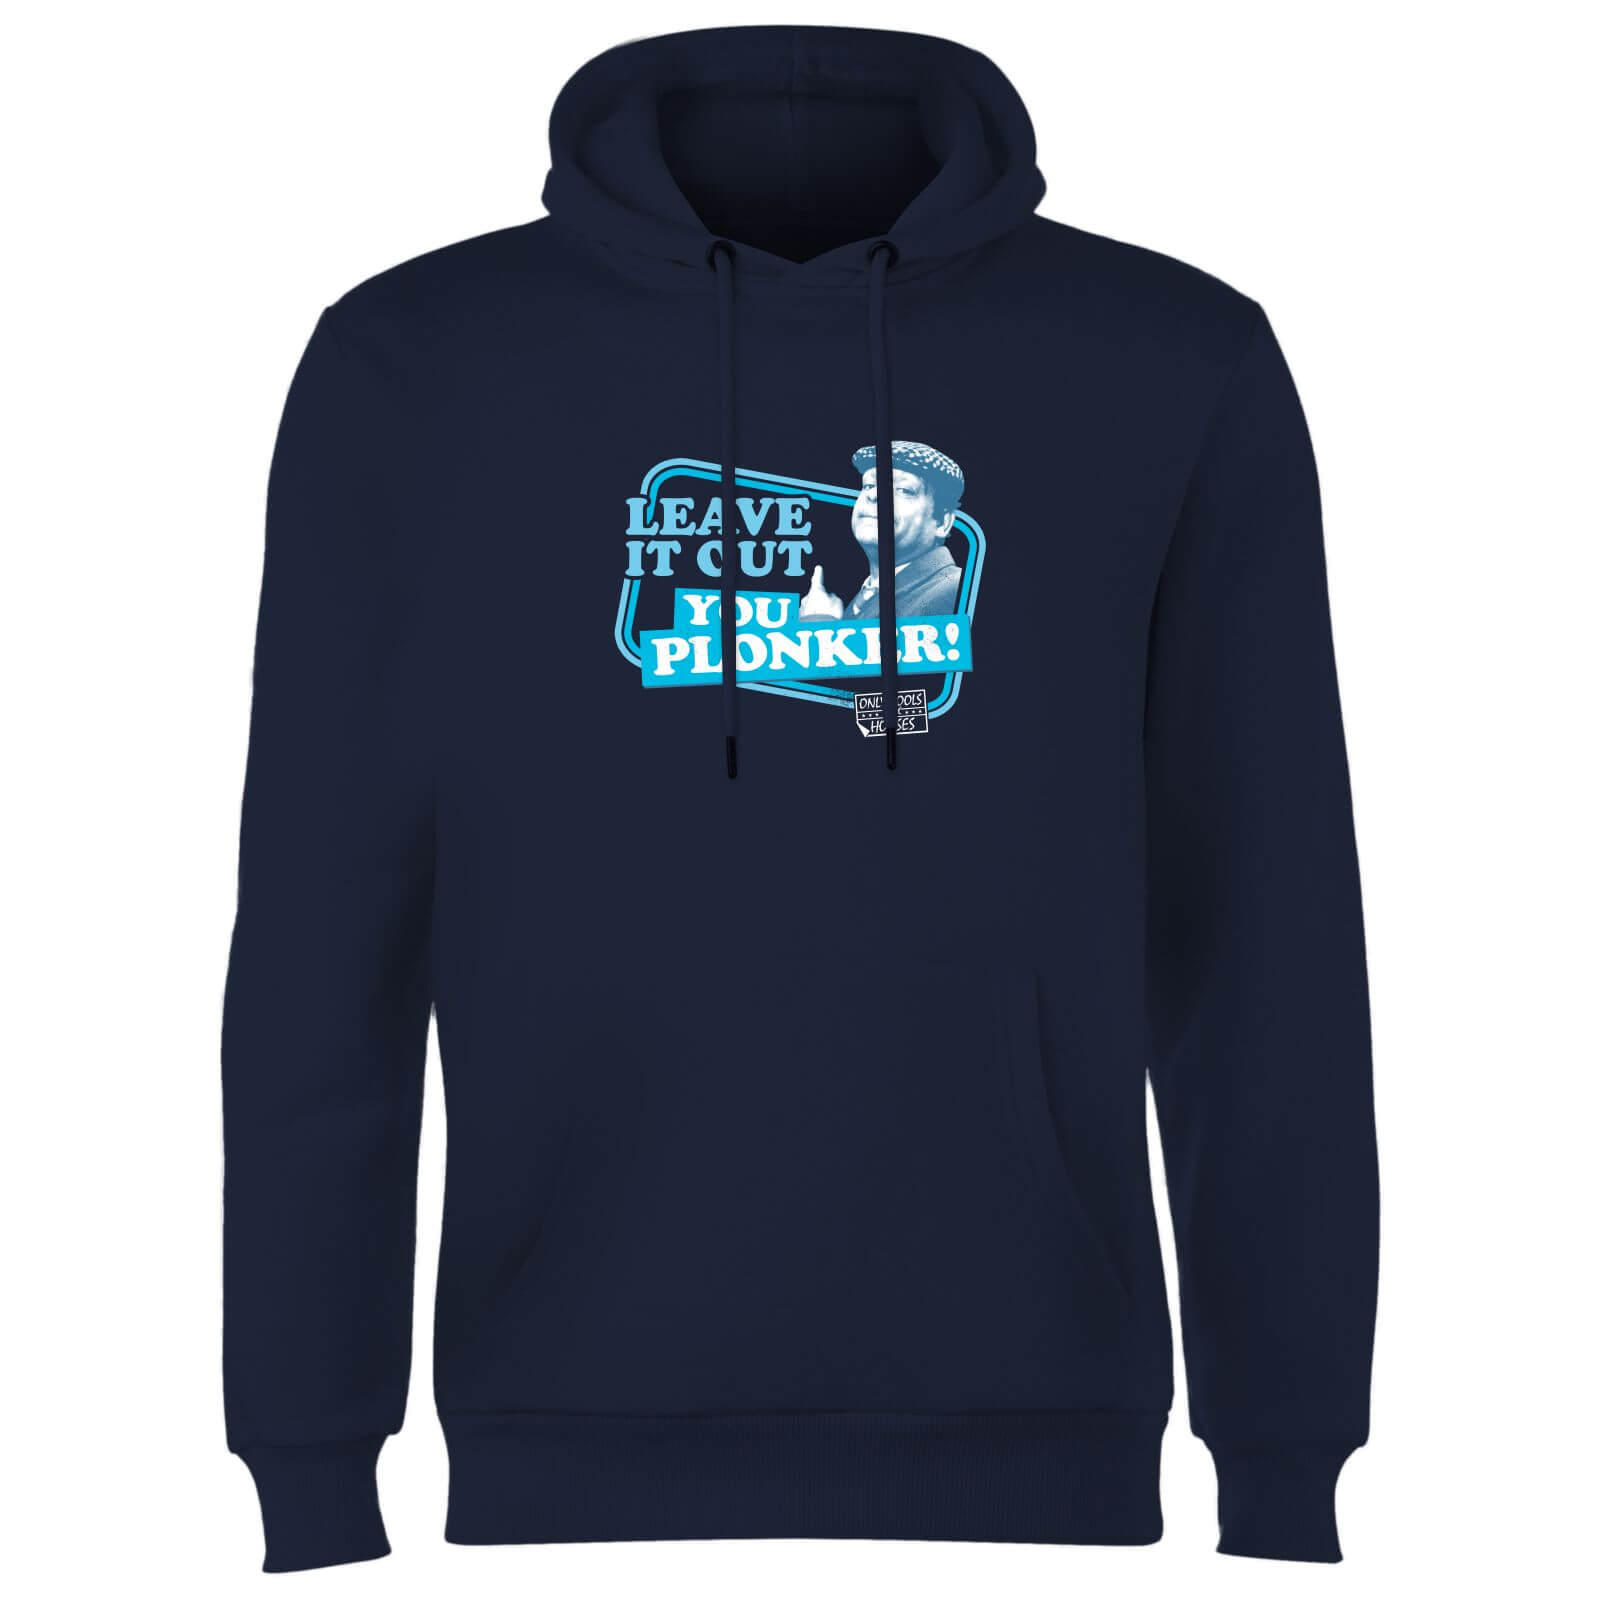 Only Fools And Horses Leave It Out You Plonker! Hoodie - Navy - XXL